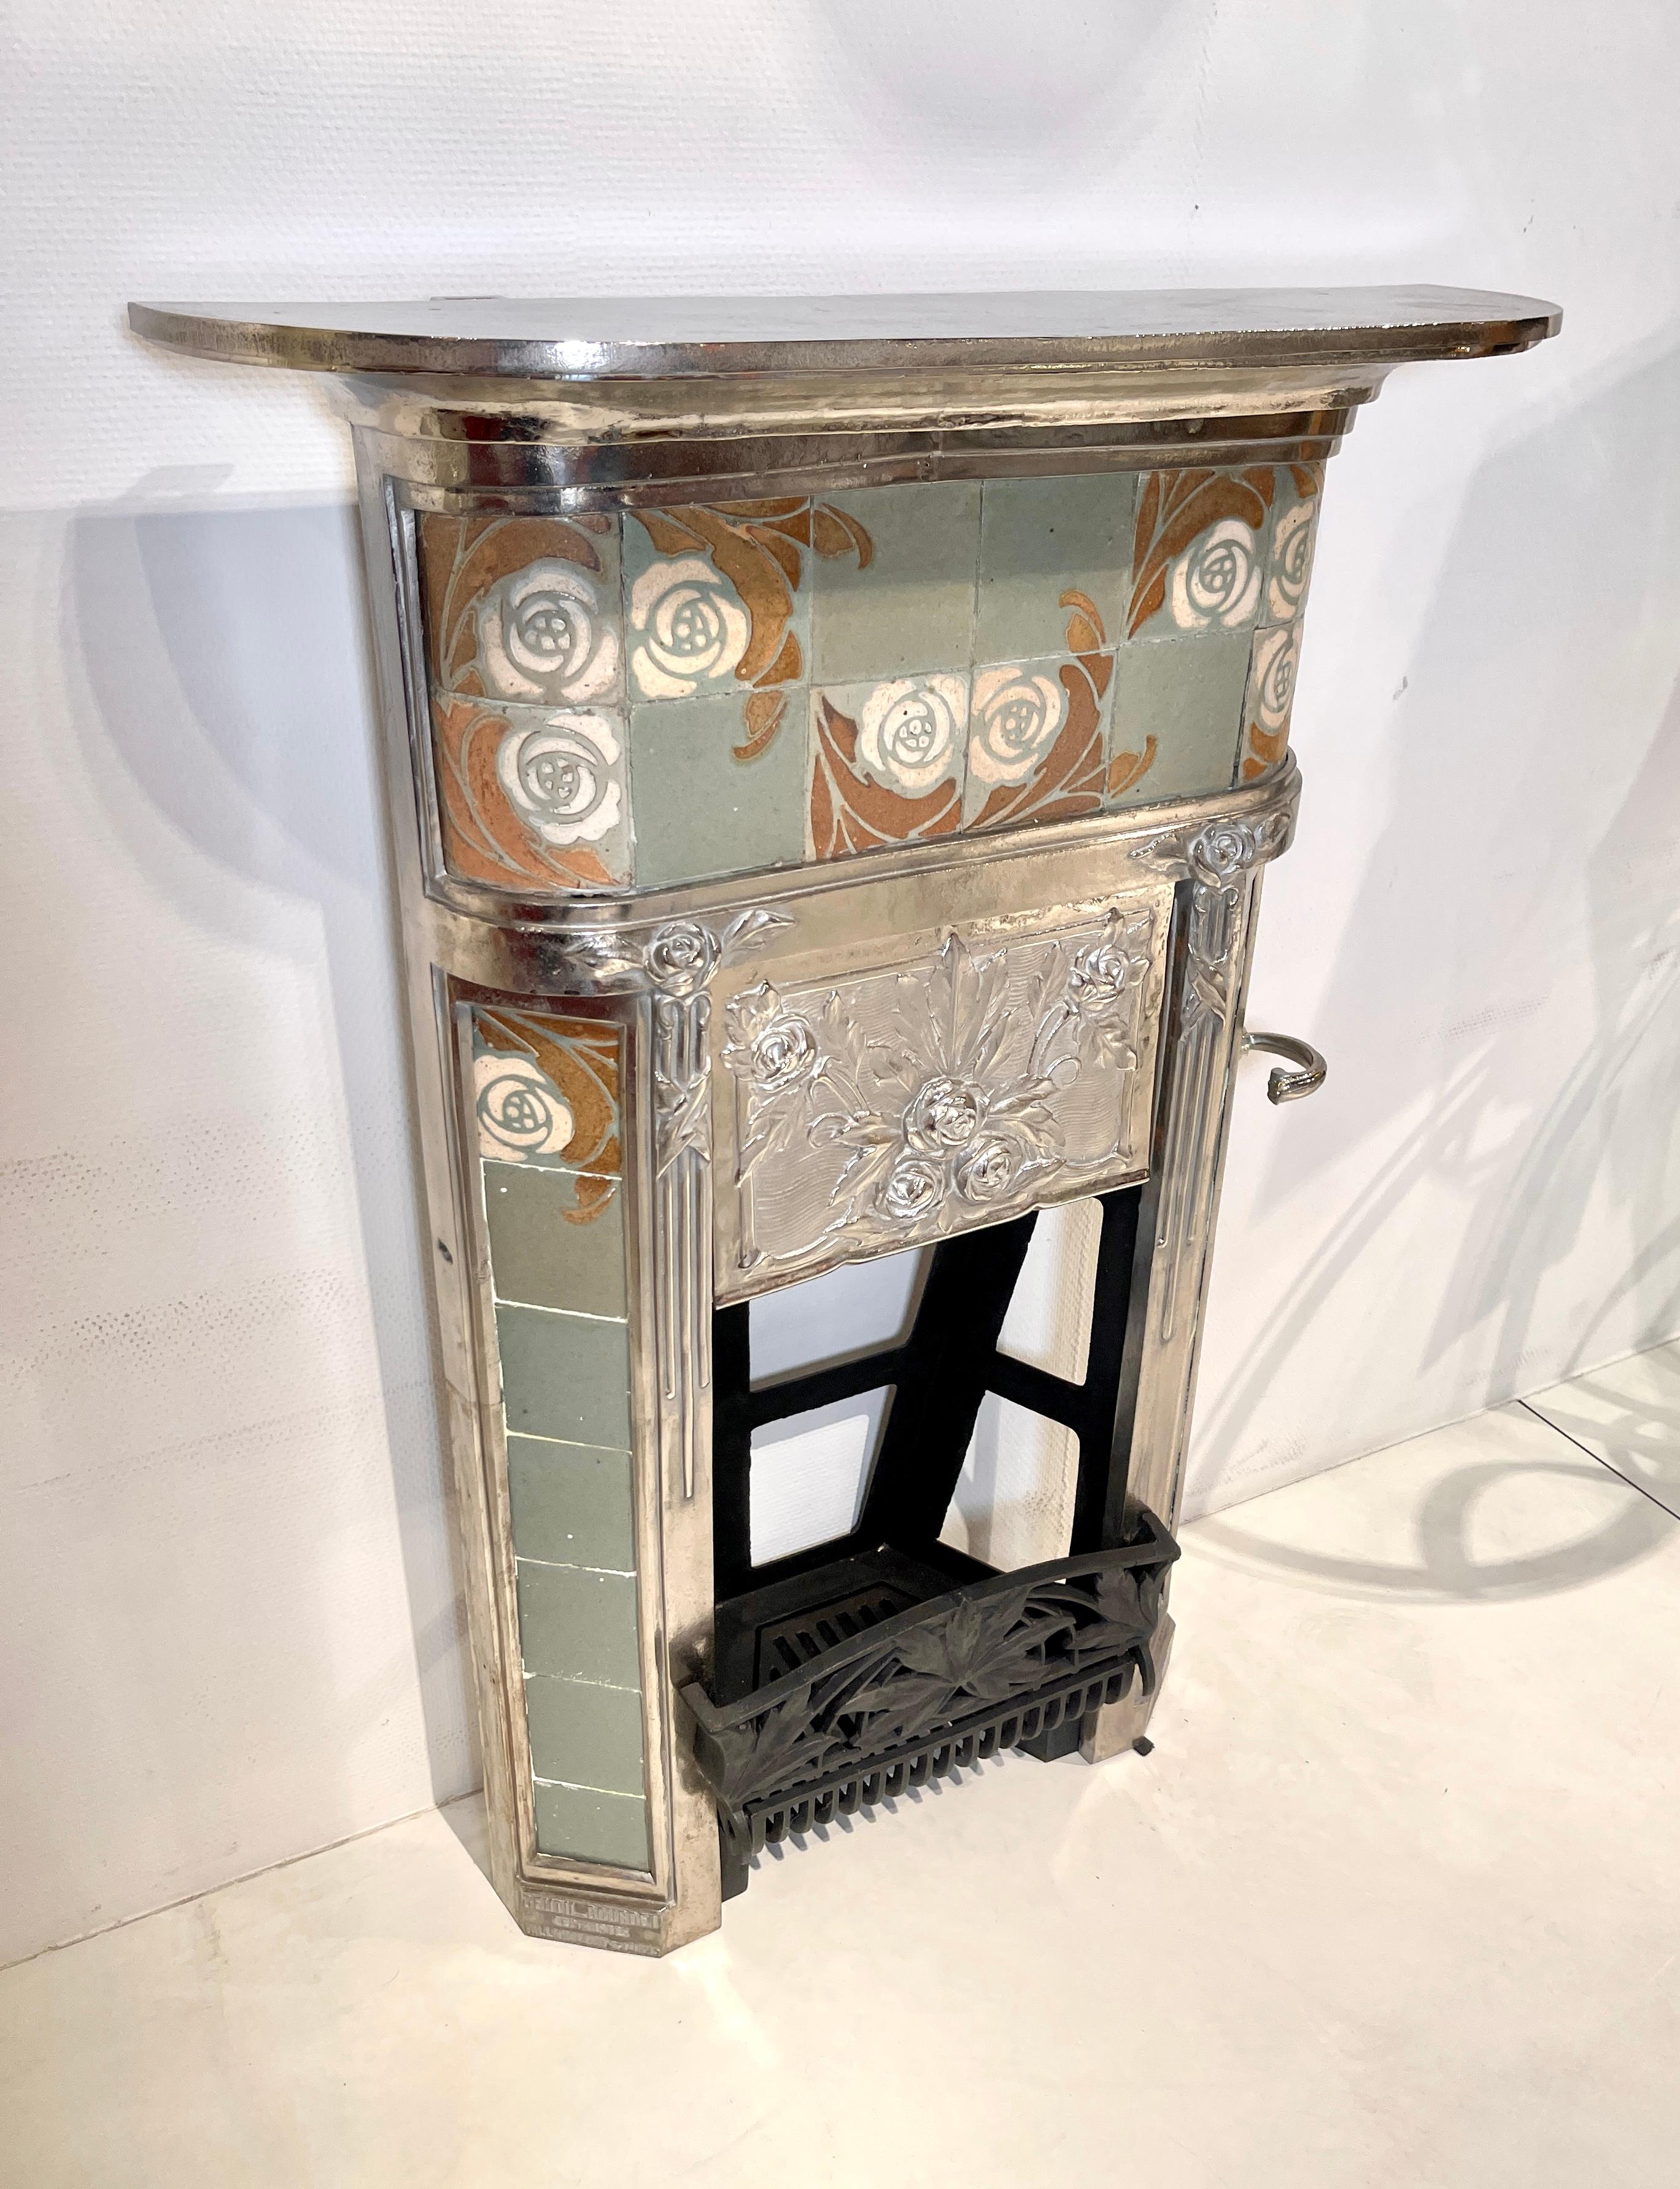 Rare and Original Fireplaces by Sue et Mare In Excellent Condition For Sale In Brussels, BE